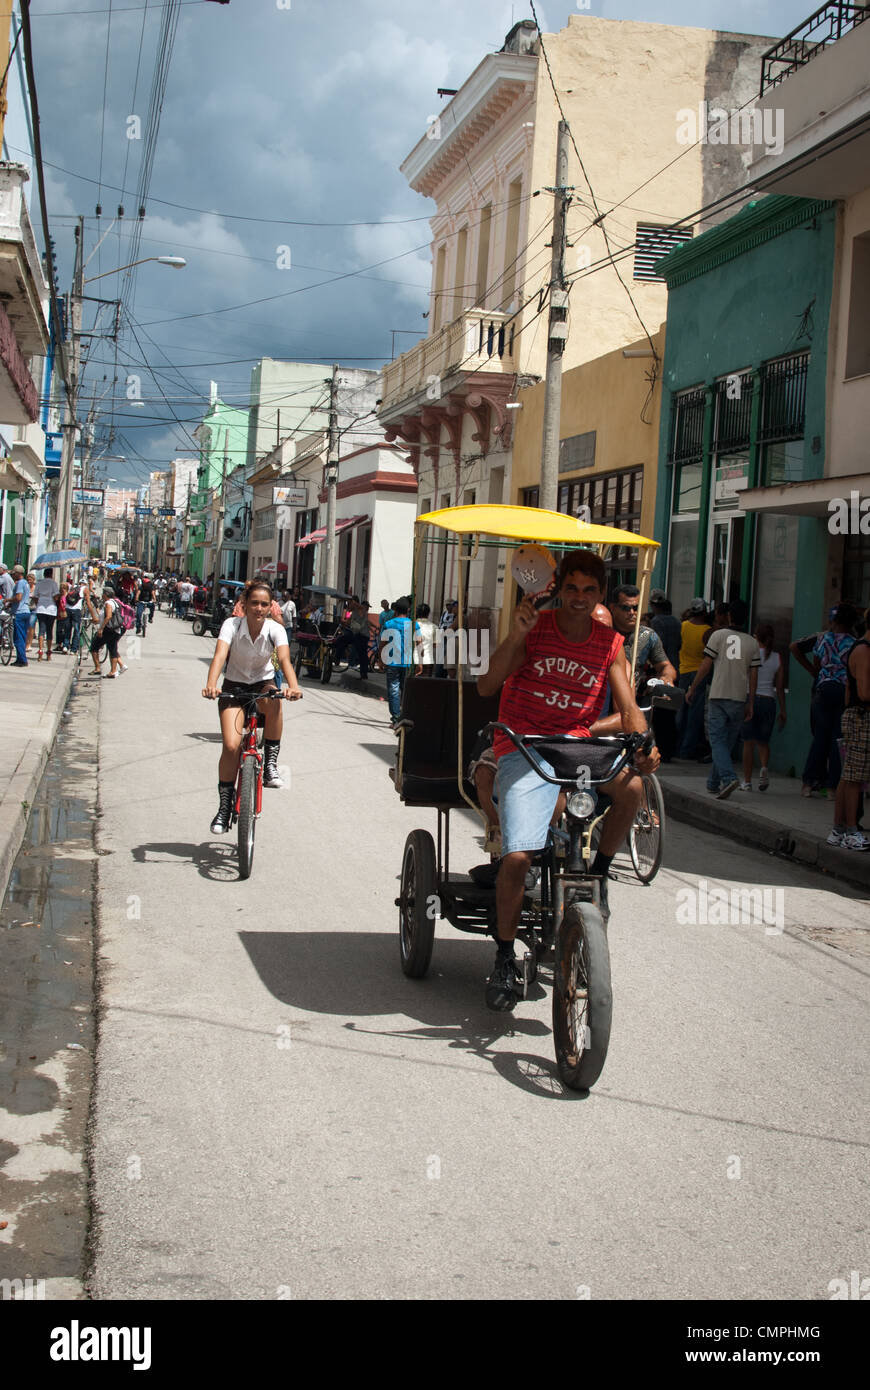 street scene, rickshaw, person on a bicycle, Calle Republica/ Republic street in Camaguey Stock Photo